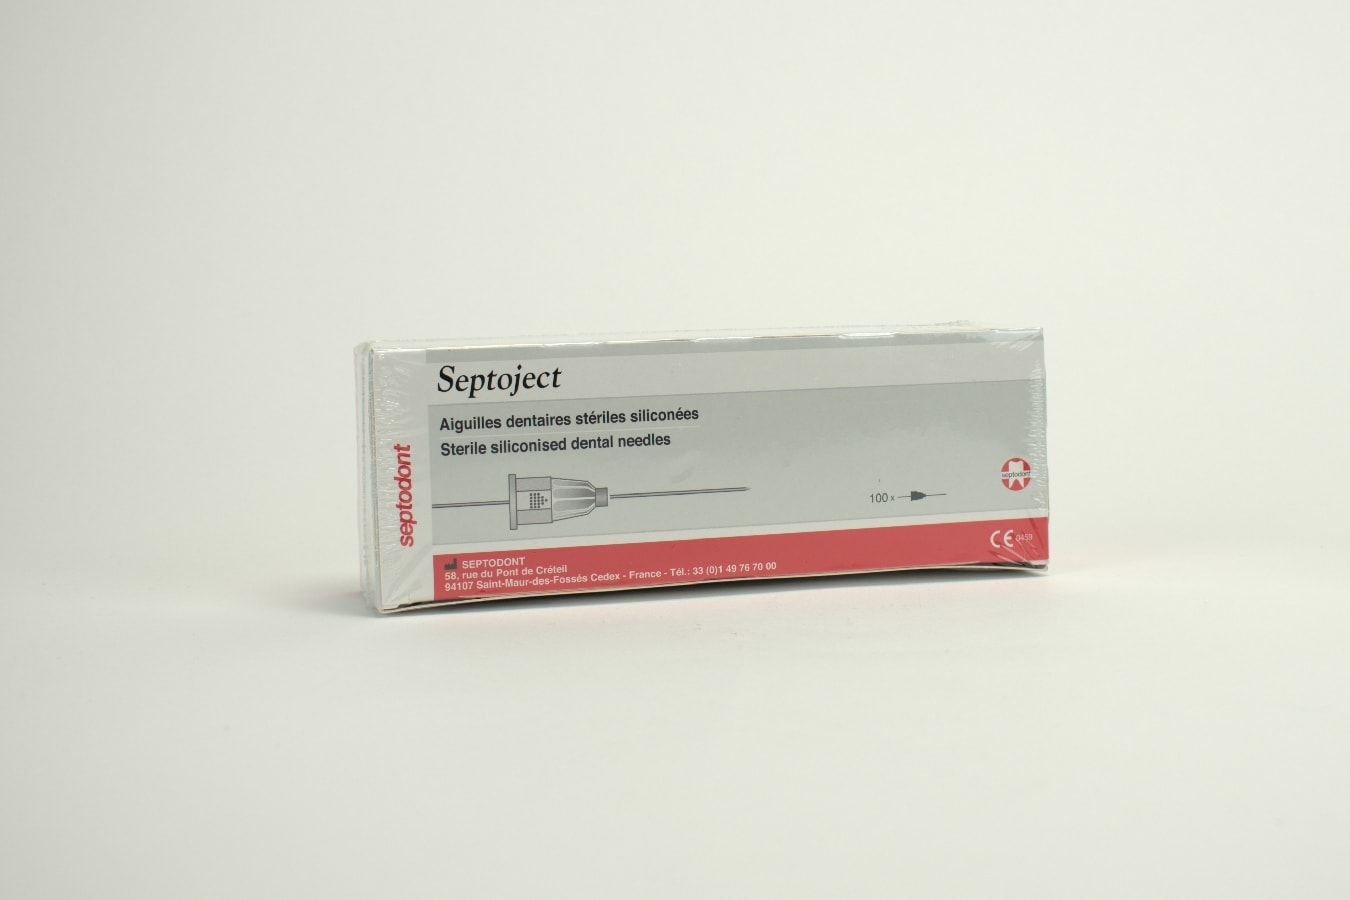  Septoject 25G 0,5x25mm 100st